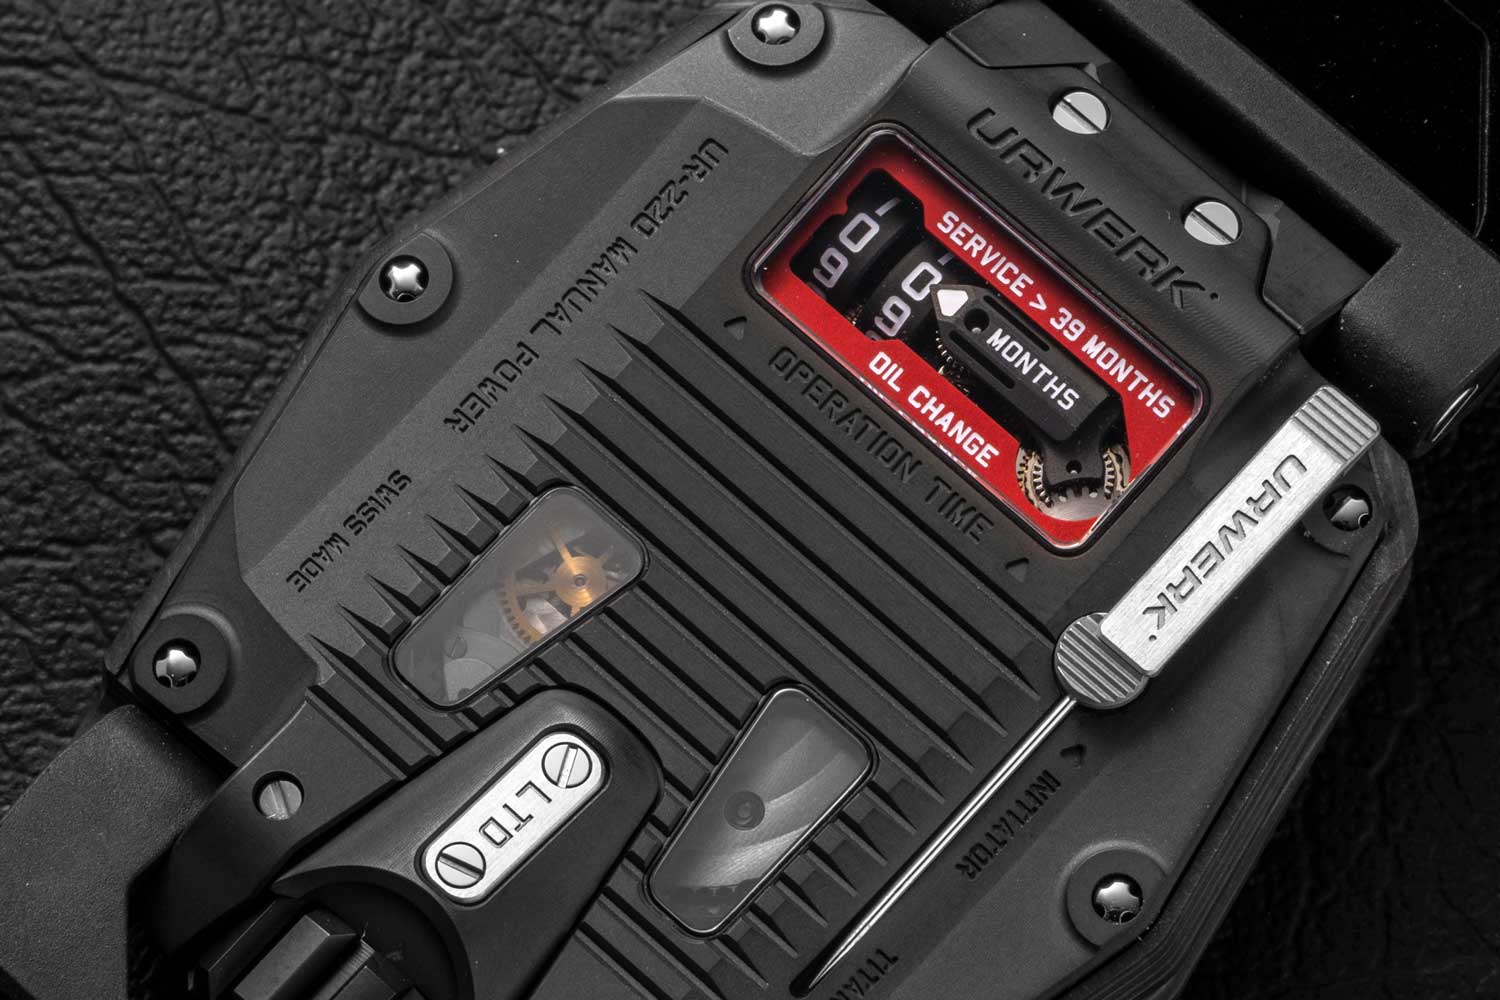 URWERK's famous oil-change indicator, which counts down to 39 months as you wear the watch, letting you know to bring it in for its scheduled service (©Revolution)